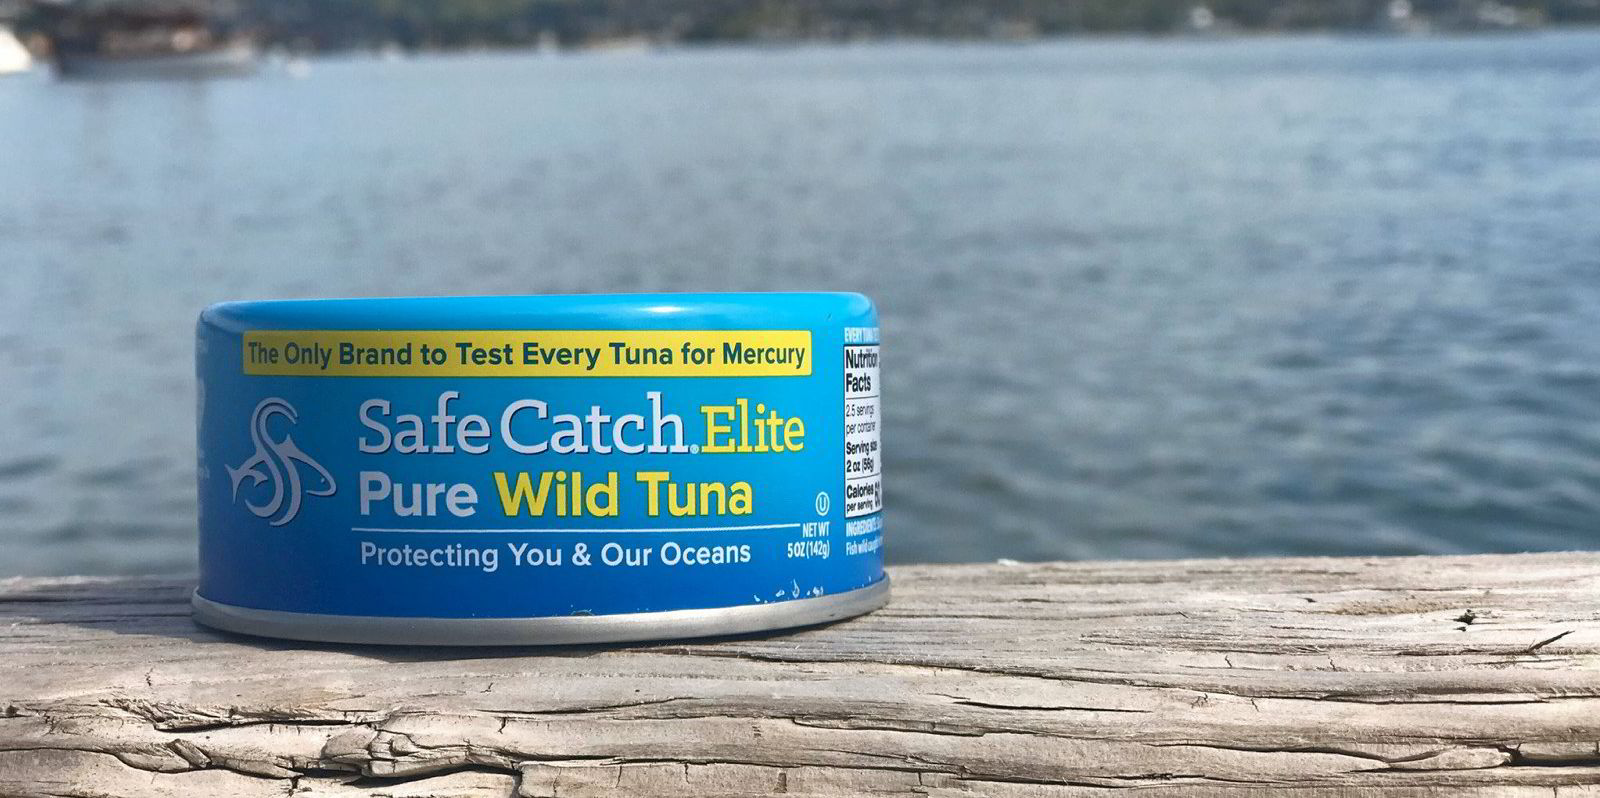 Watchdog finds some of 'mercury tested' canned tuna group's